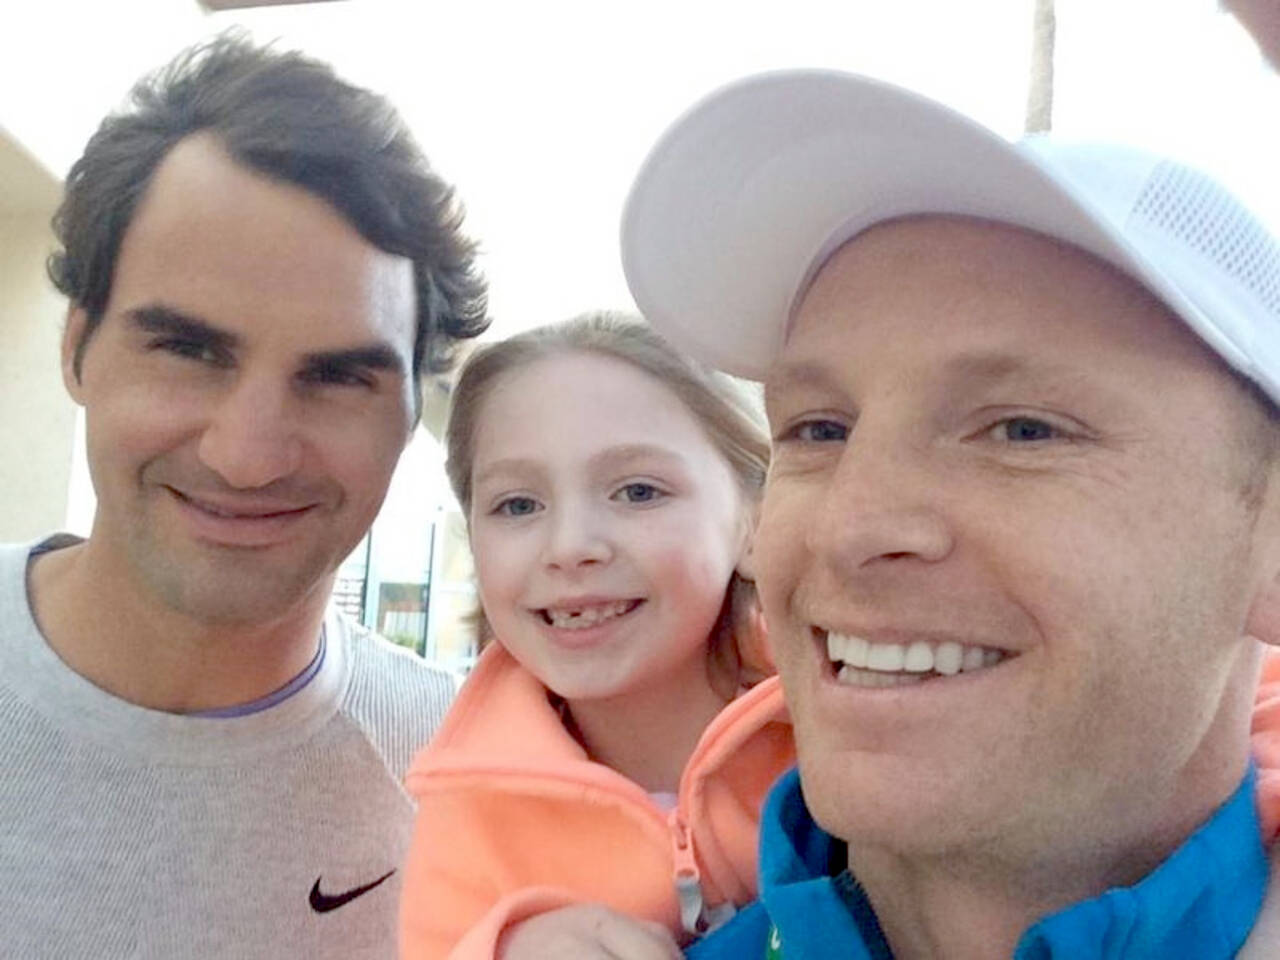 Port Angeles tennis star Jesse Schouten, at right, with his daughter and tennis legend Roger Federer. (Courtesy photo)